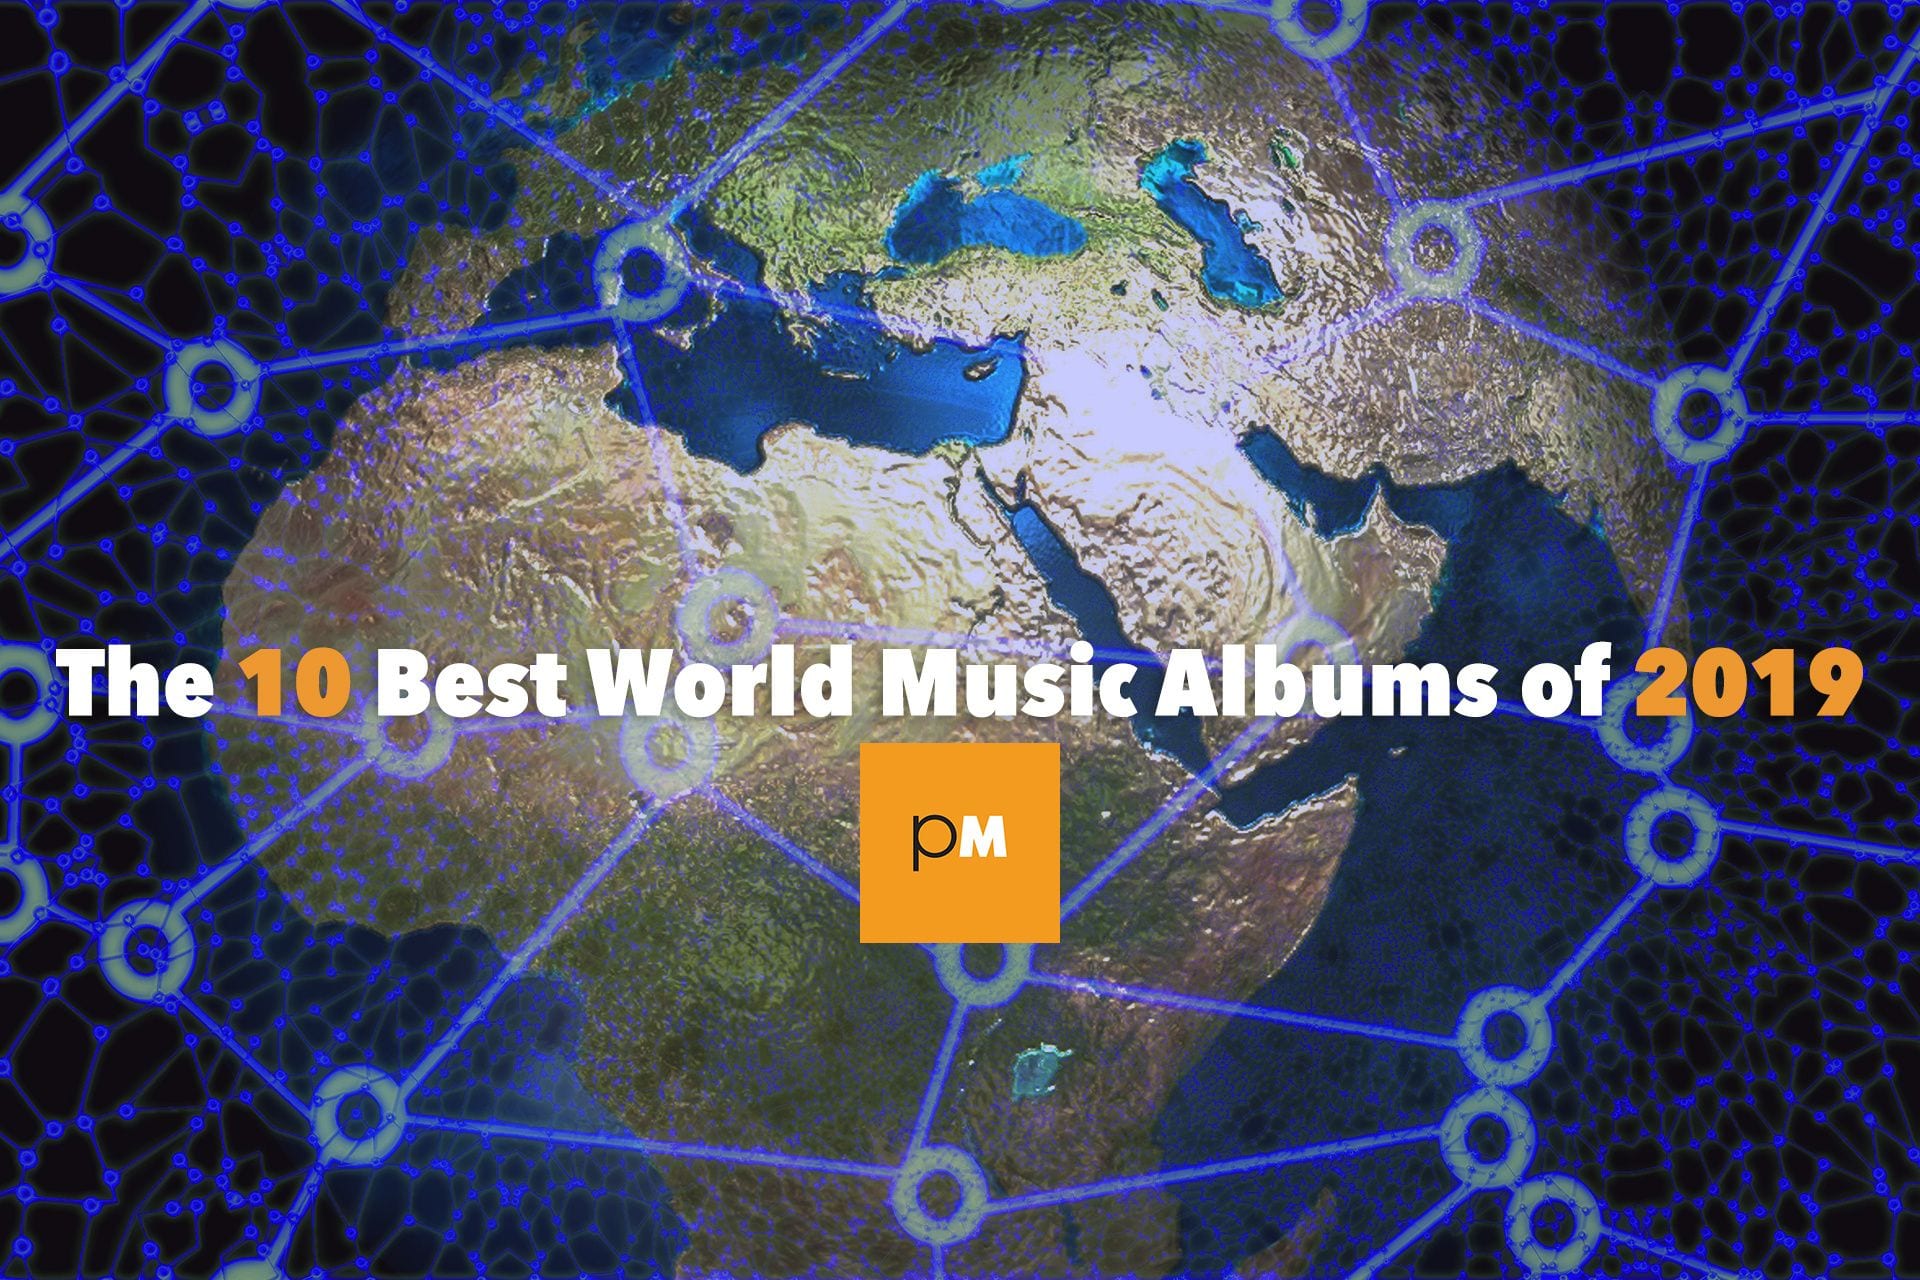 The 10 Best World Music Albums of 2019